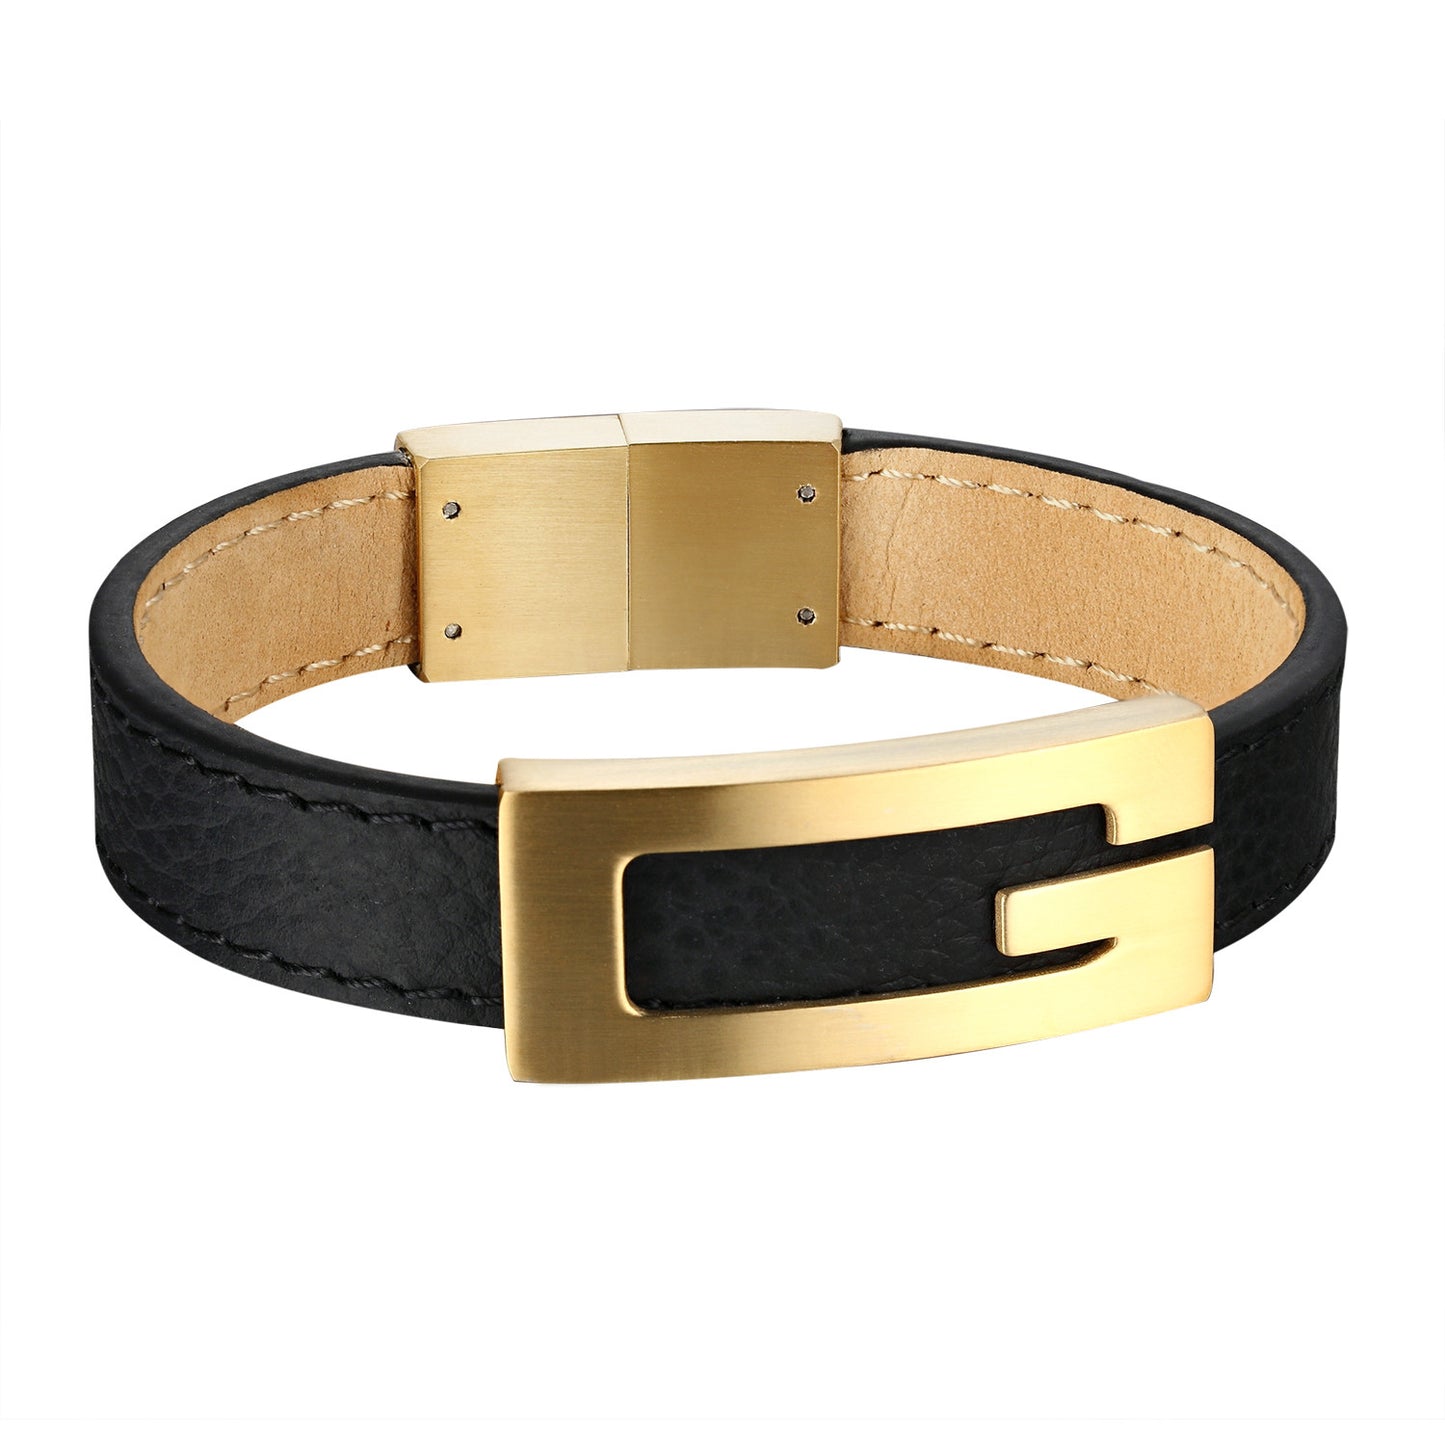 Gold Tone G Buckle Bracelet Unique Mens Black Leather Band Stainless Steel 17mm